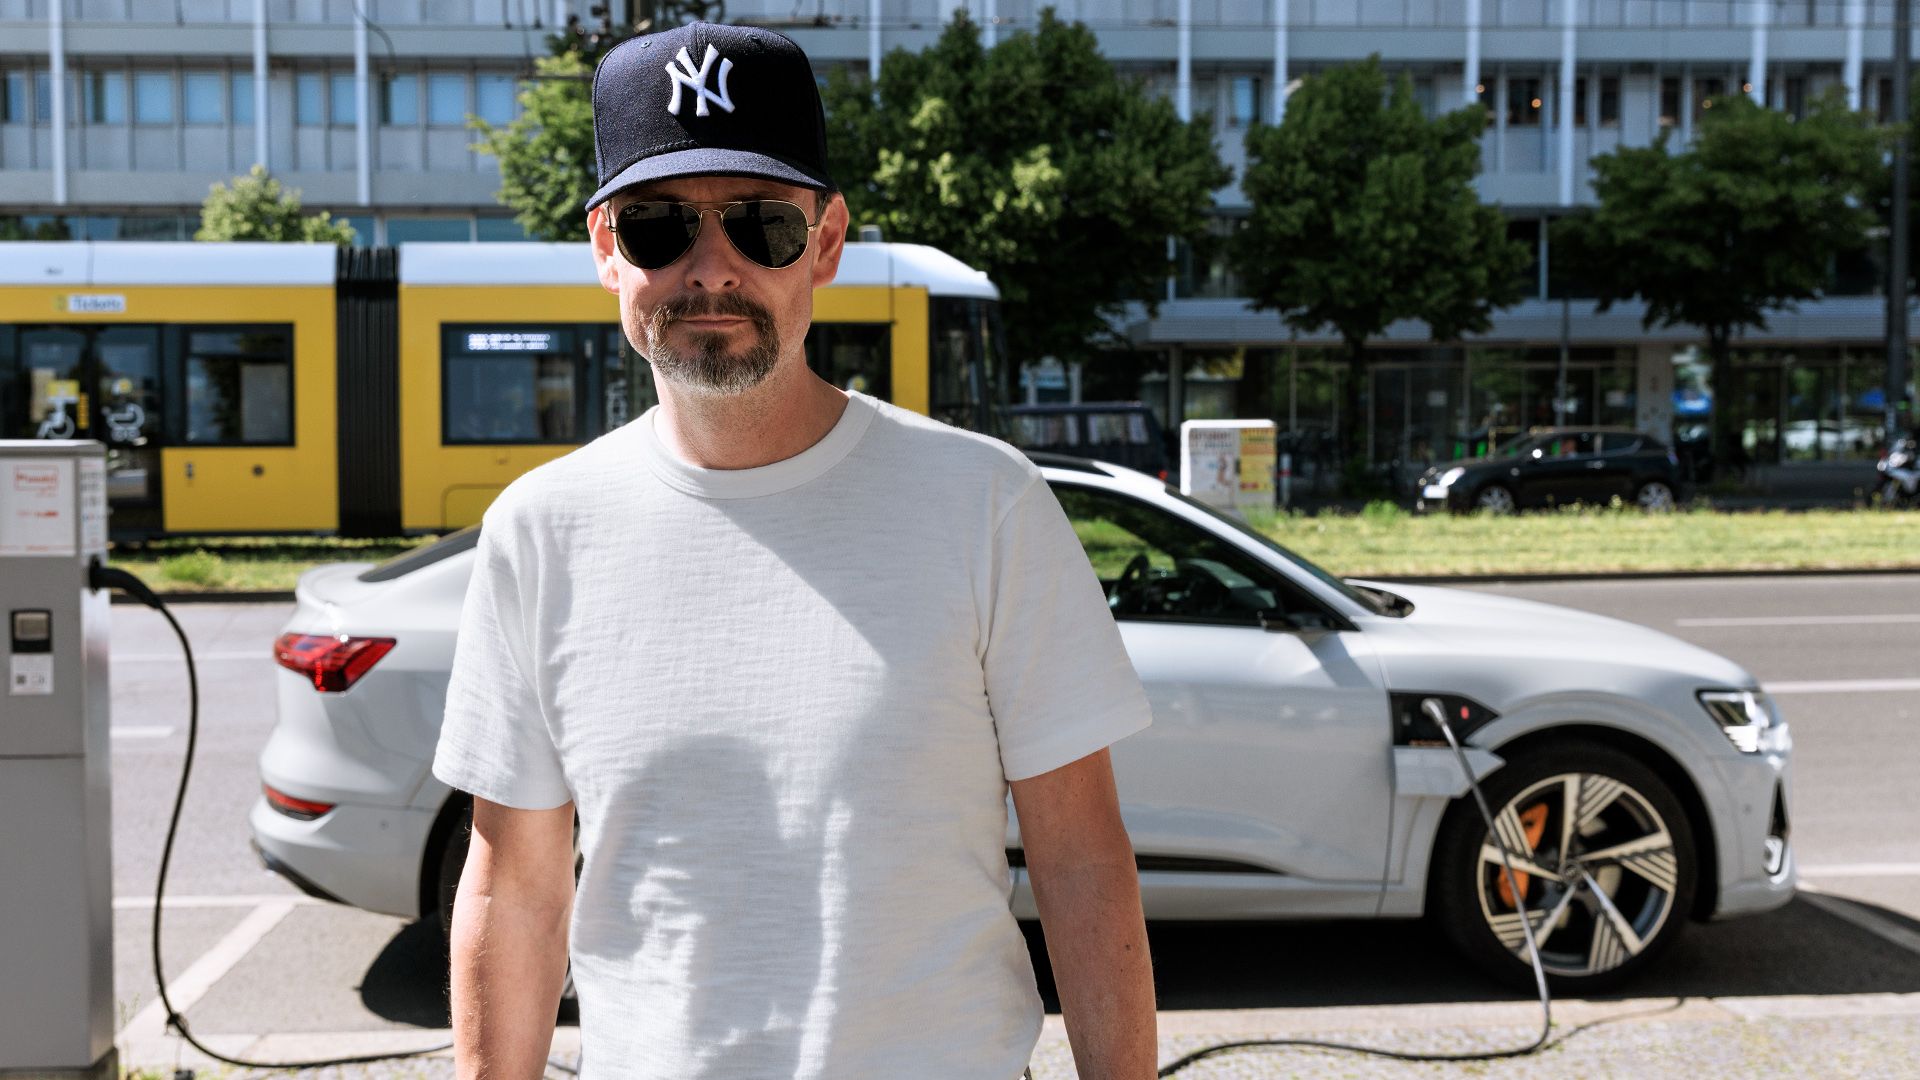 Marco Voigt connects his white Audi e-tron Sportback to a charging station in the city of Berlin.